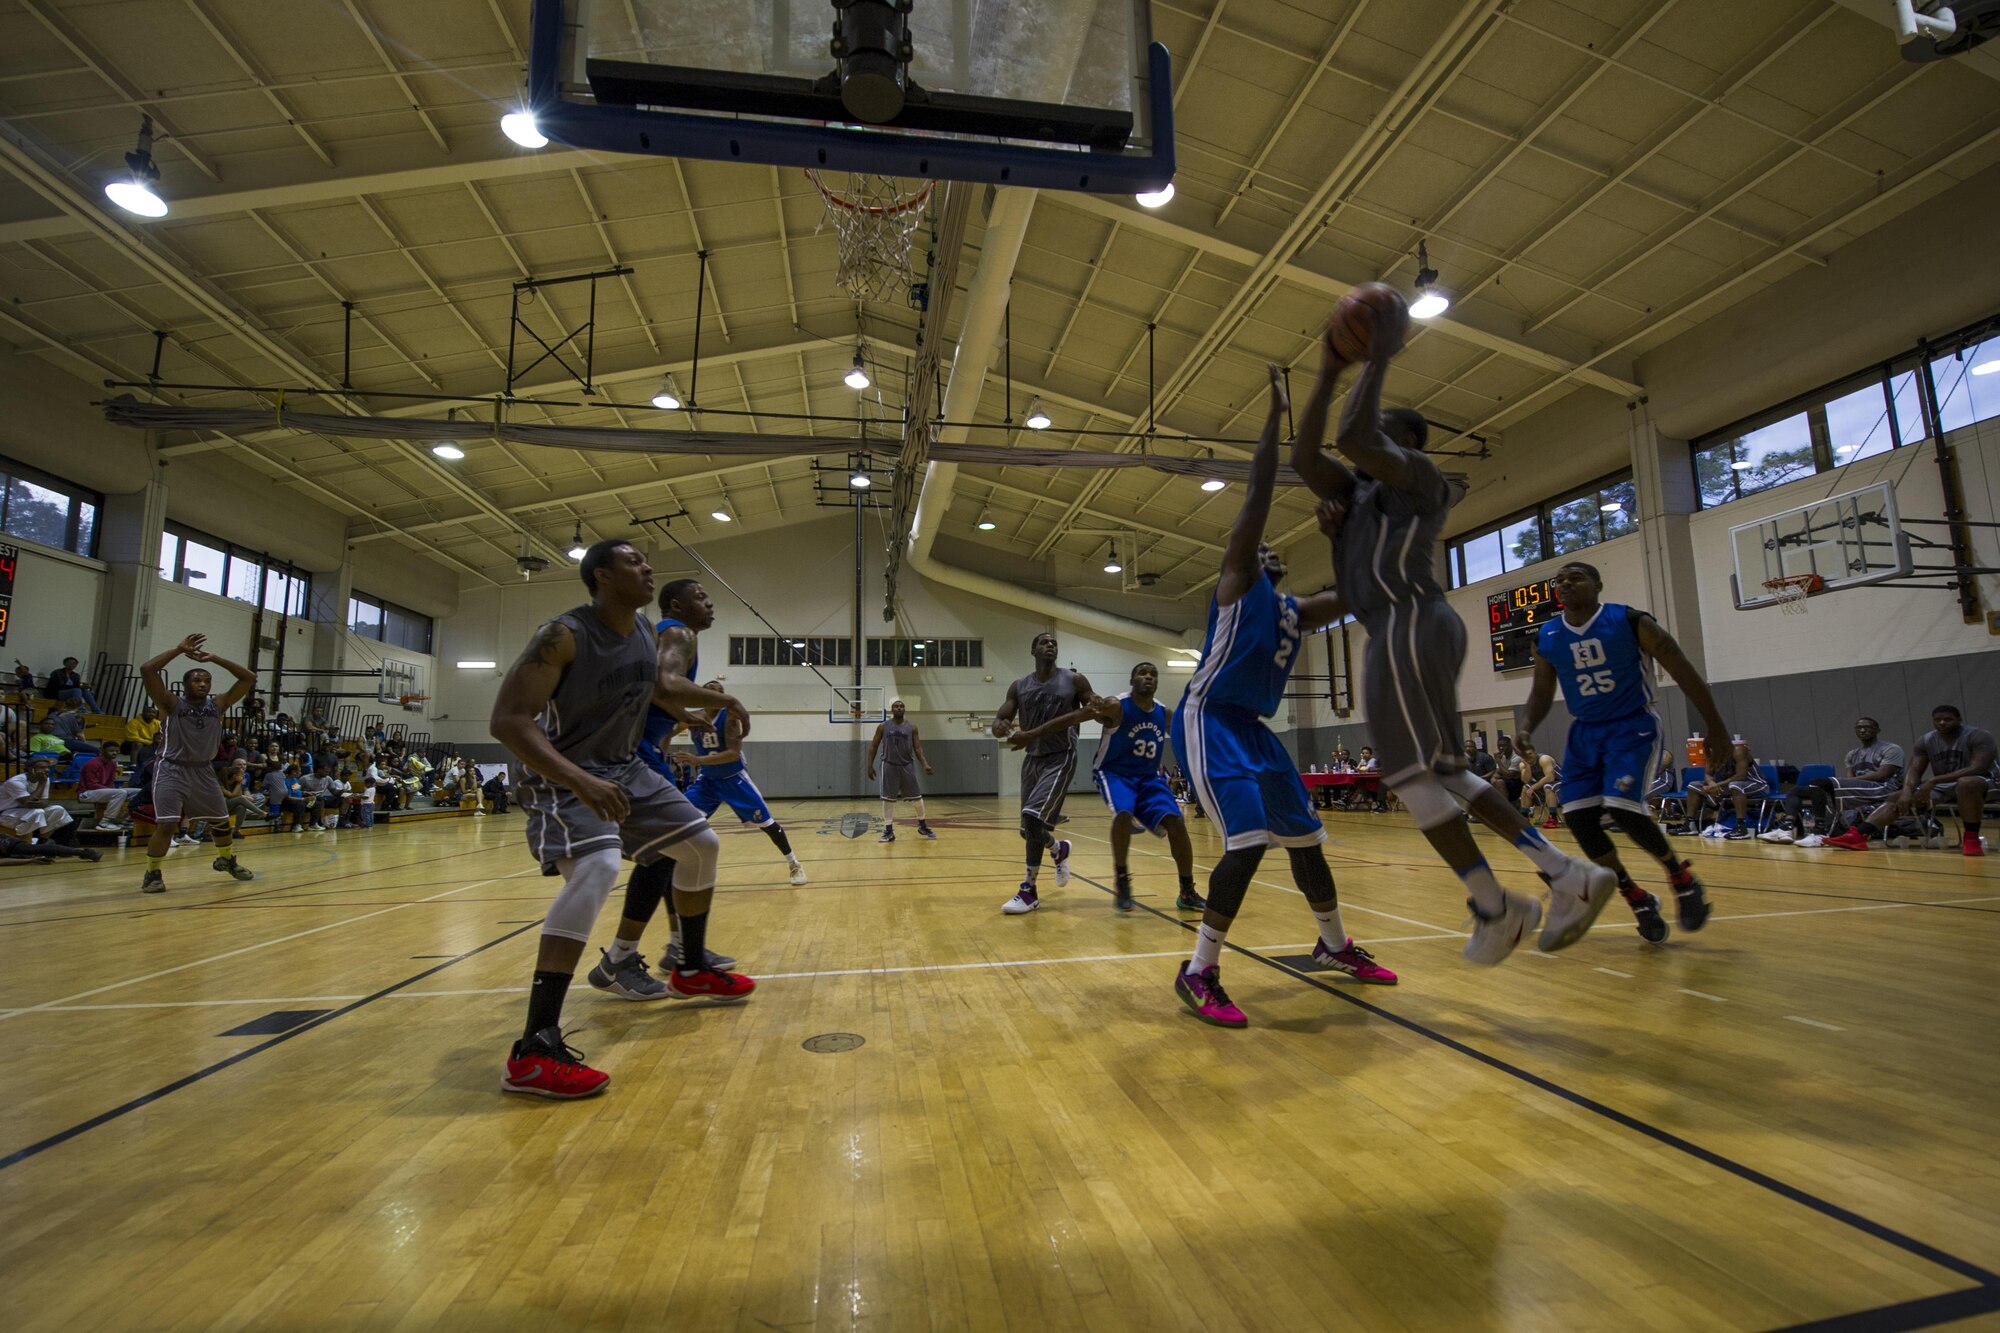 A member of Hurlburt Field’s basketball team attempts to shoot during a basketball tournament at the Aderholt Fitness Center on Hurlburt Field, Fla., Jan. 15, 2017. The 1st Special Operations Force Support Squadron hosted the 2nd annual commemorative basketball tournament to celebrate Martin Luther King Jr. Day, which is observed on the third Monday of January. (U.S. Air Force photo by Airman 1st Class Joseph Pick)